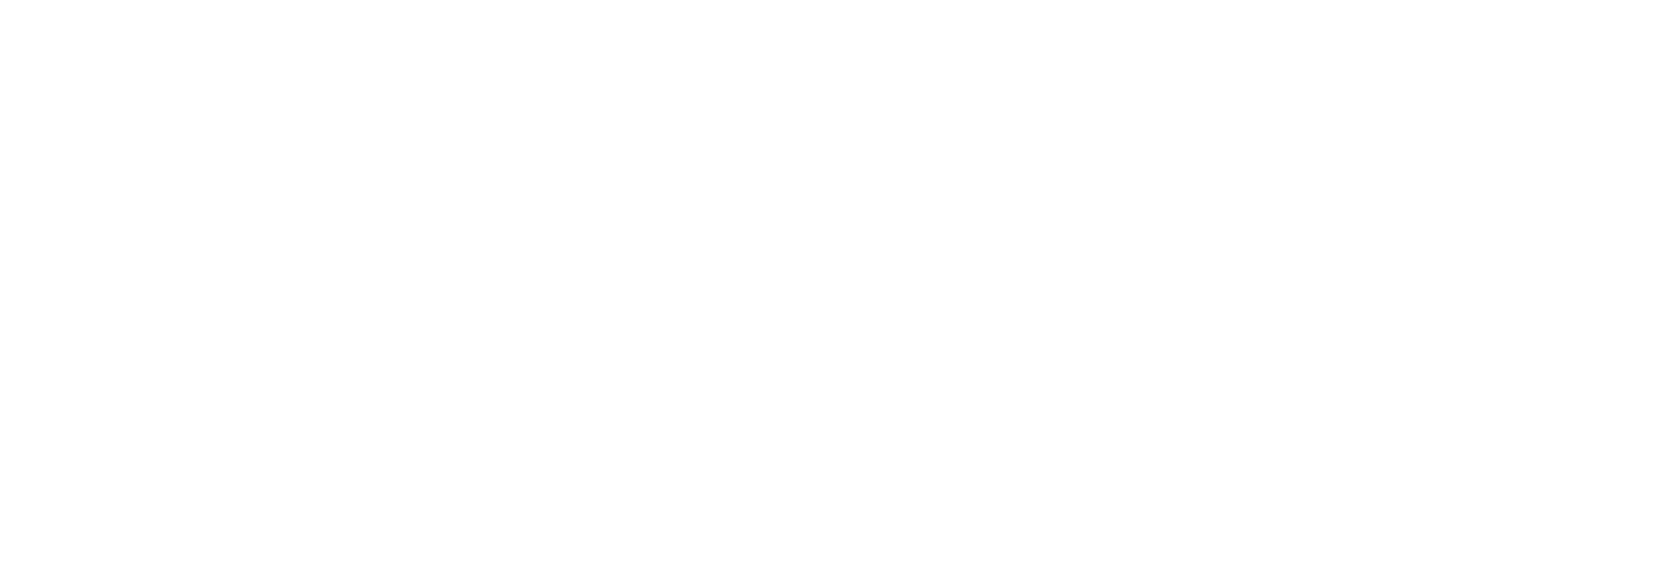 All caps white text reads "Research & Teaching Fellow" [w/ a small white triangle then added in the bottom right].